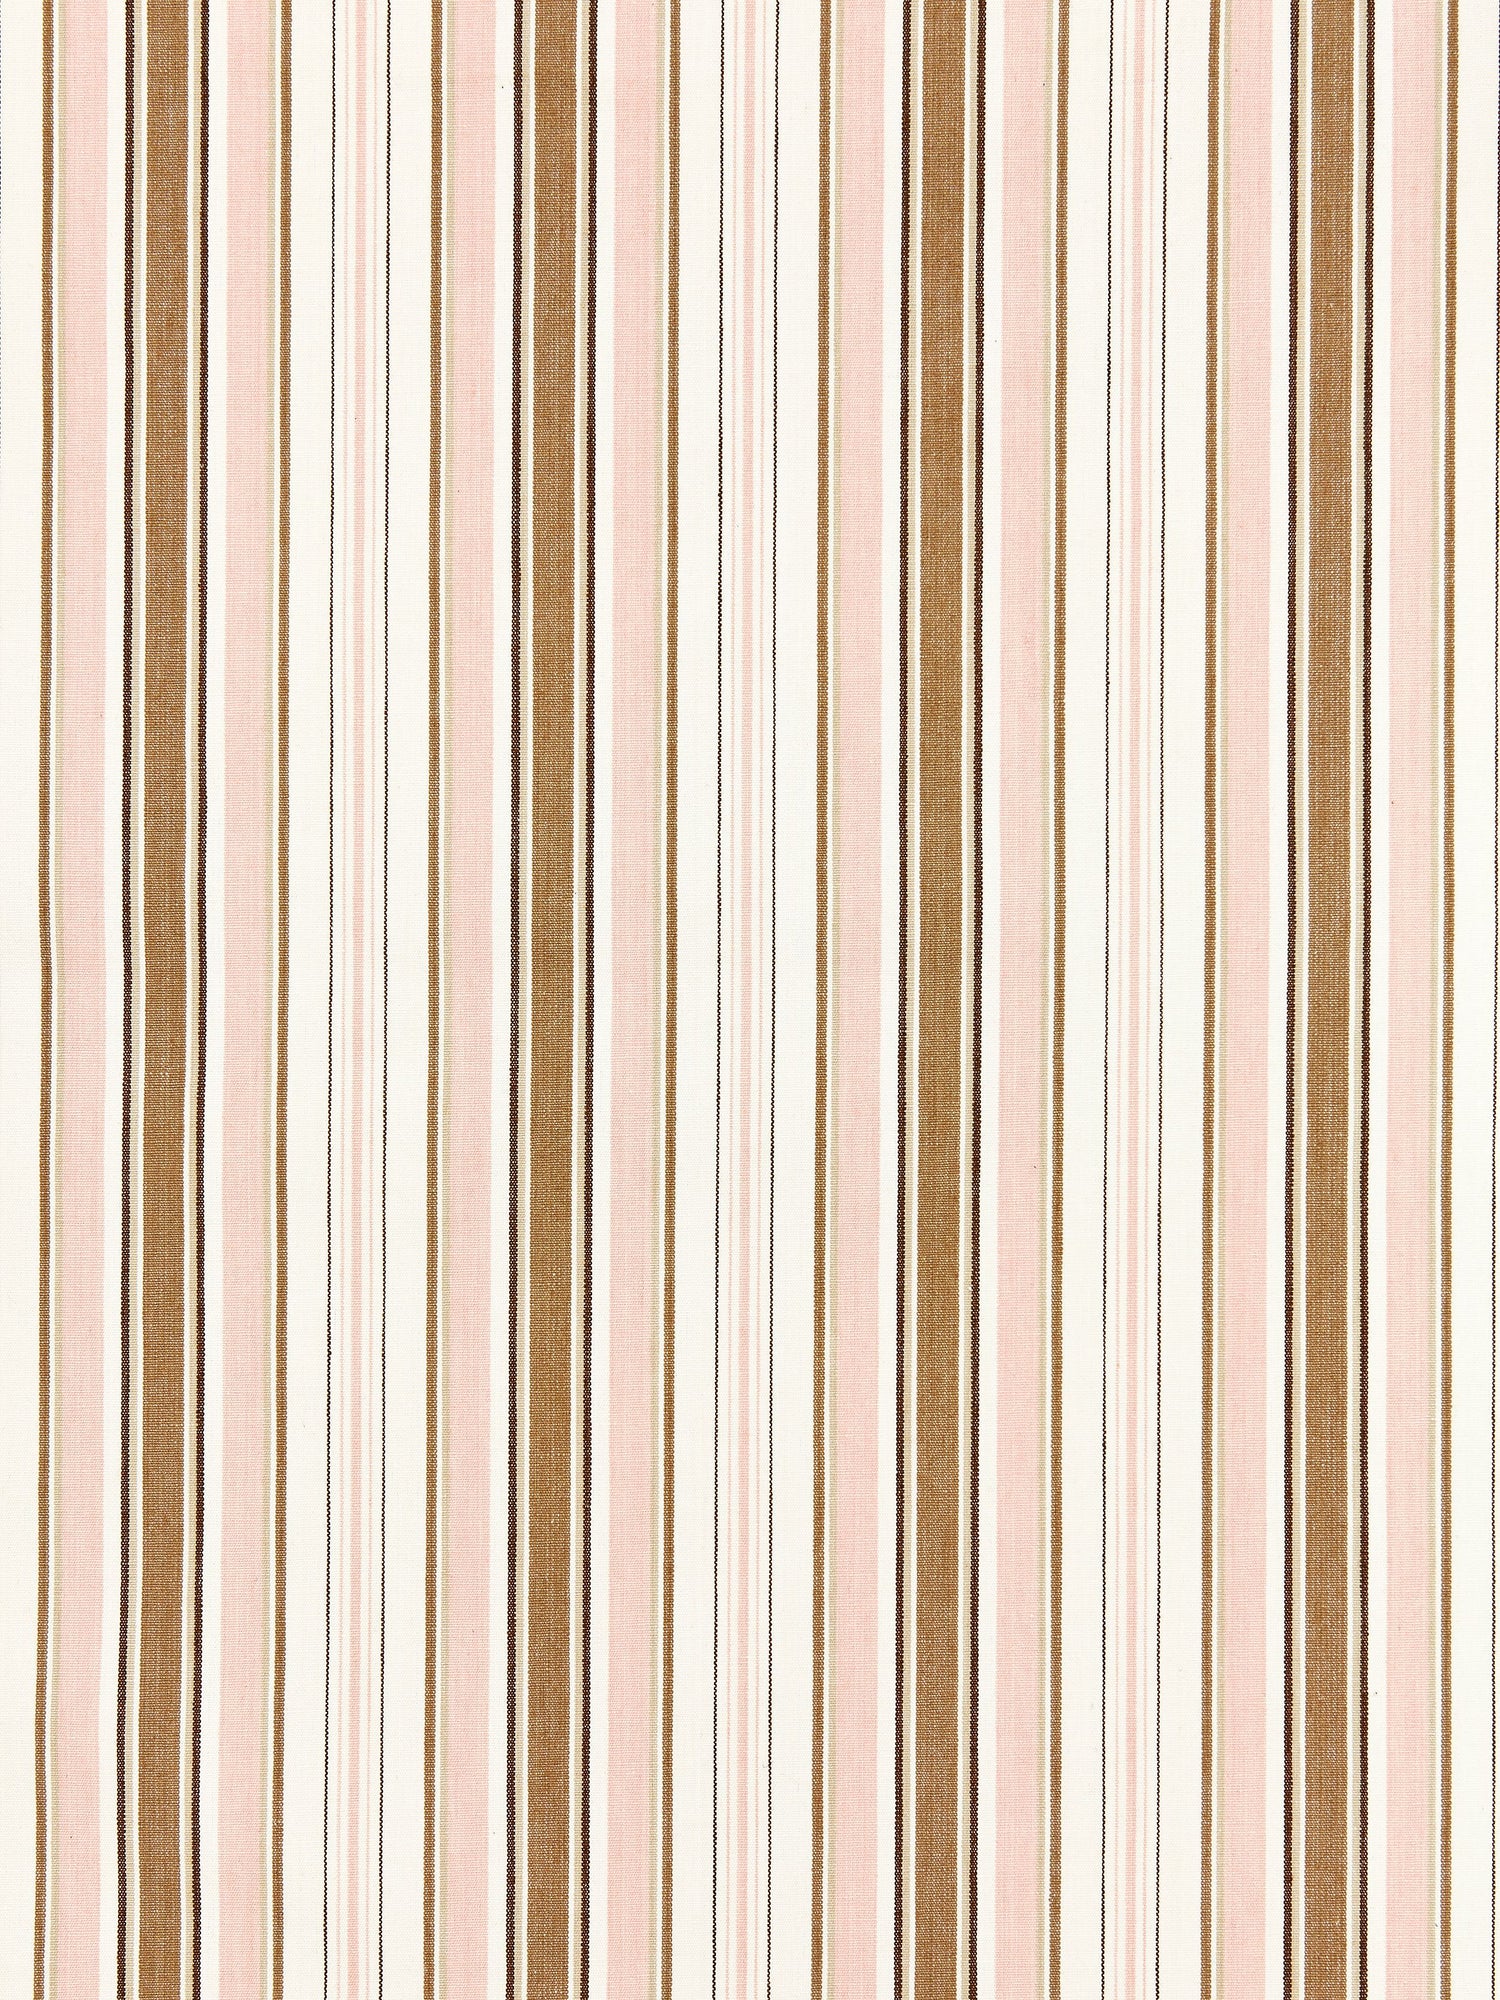 Andover Cotton Stripe fabric in blush color - pattern number SC 000127113 - by Scalamandre in the Scalamandre Fabrics Book 1 collection